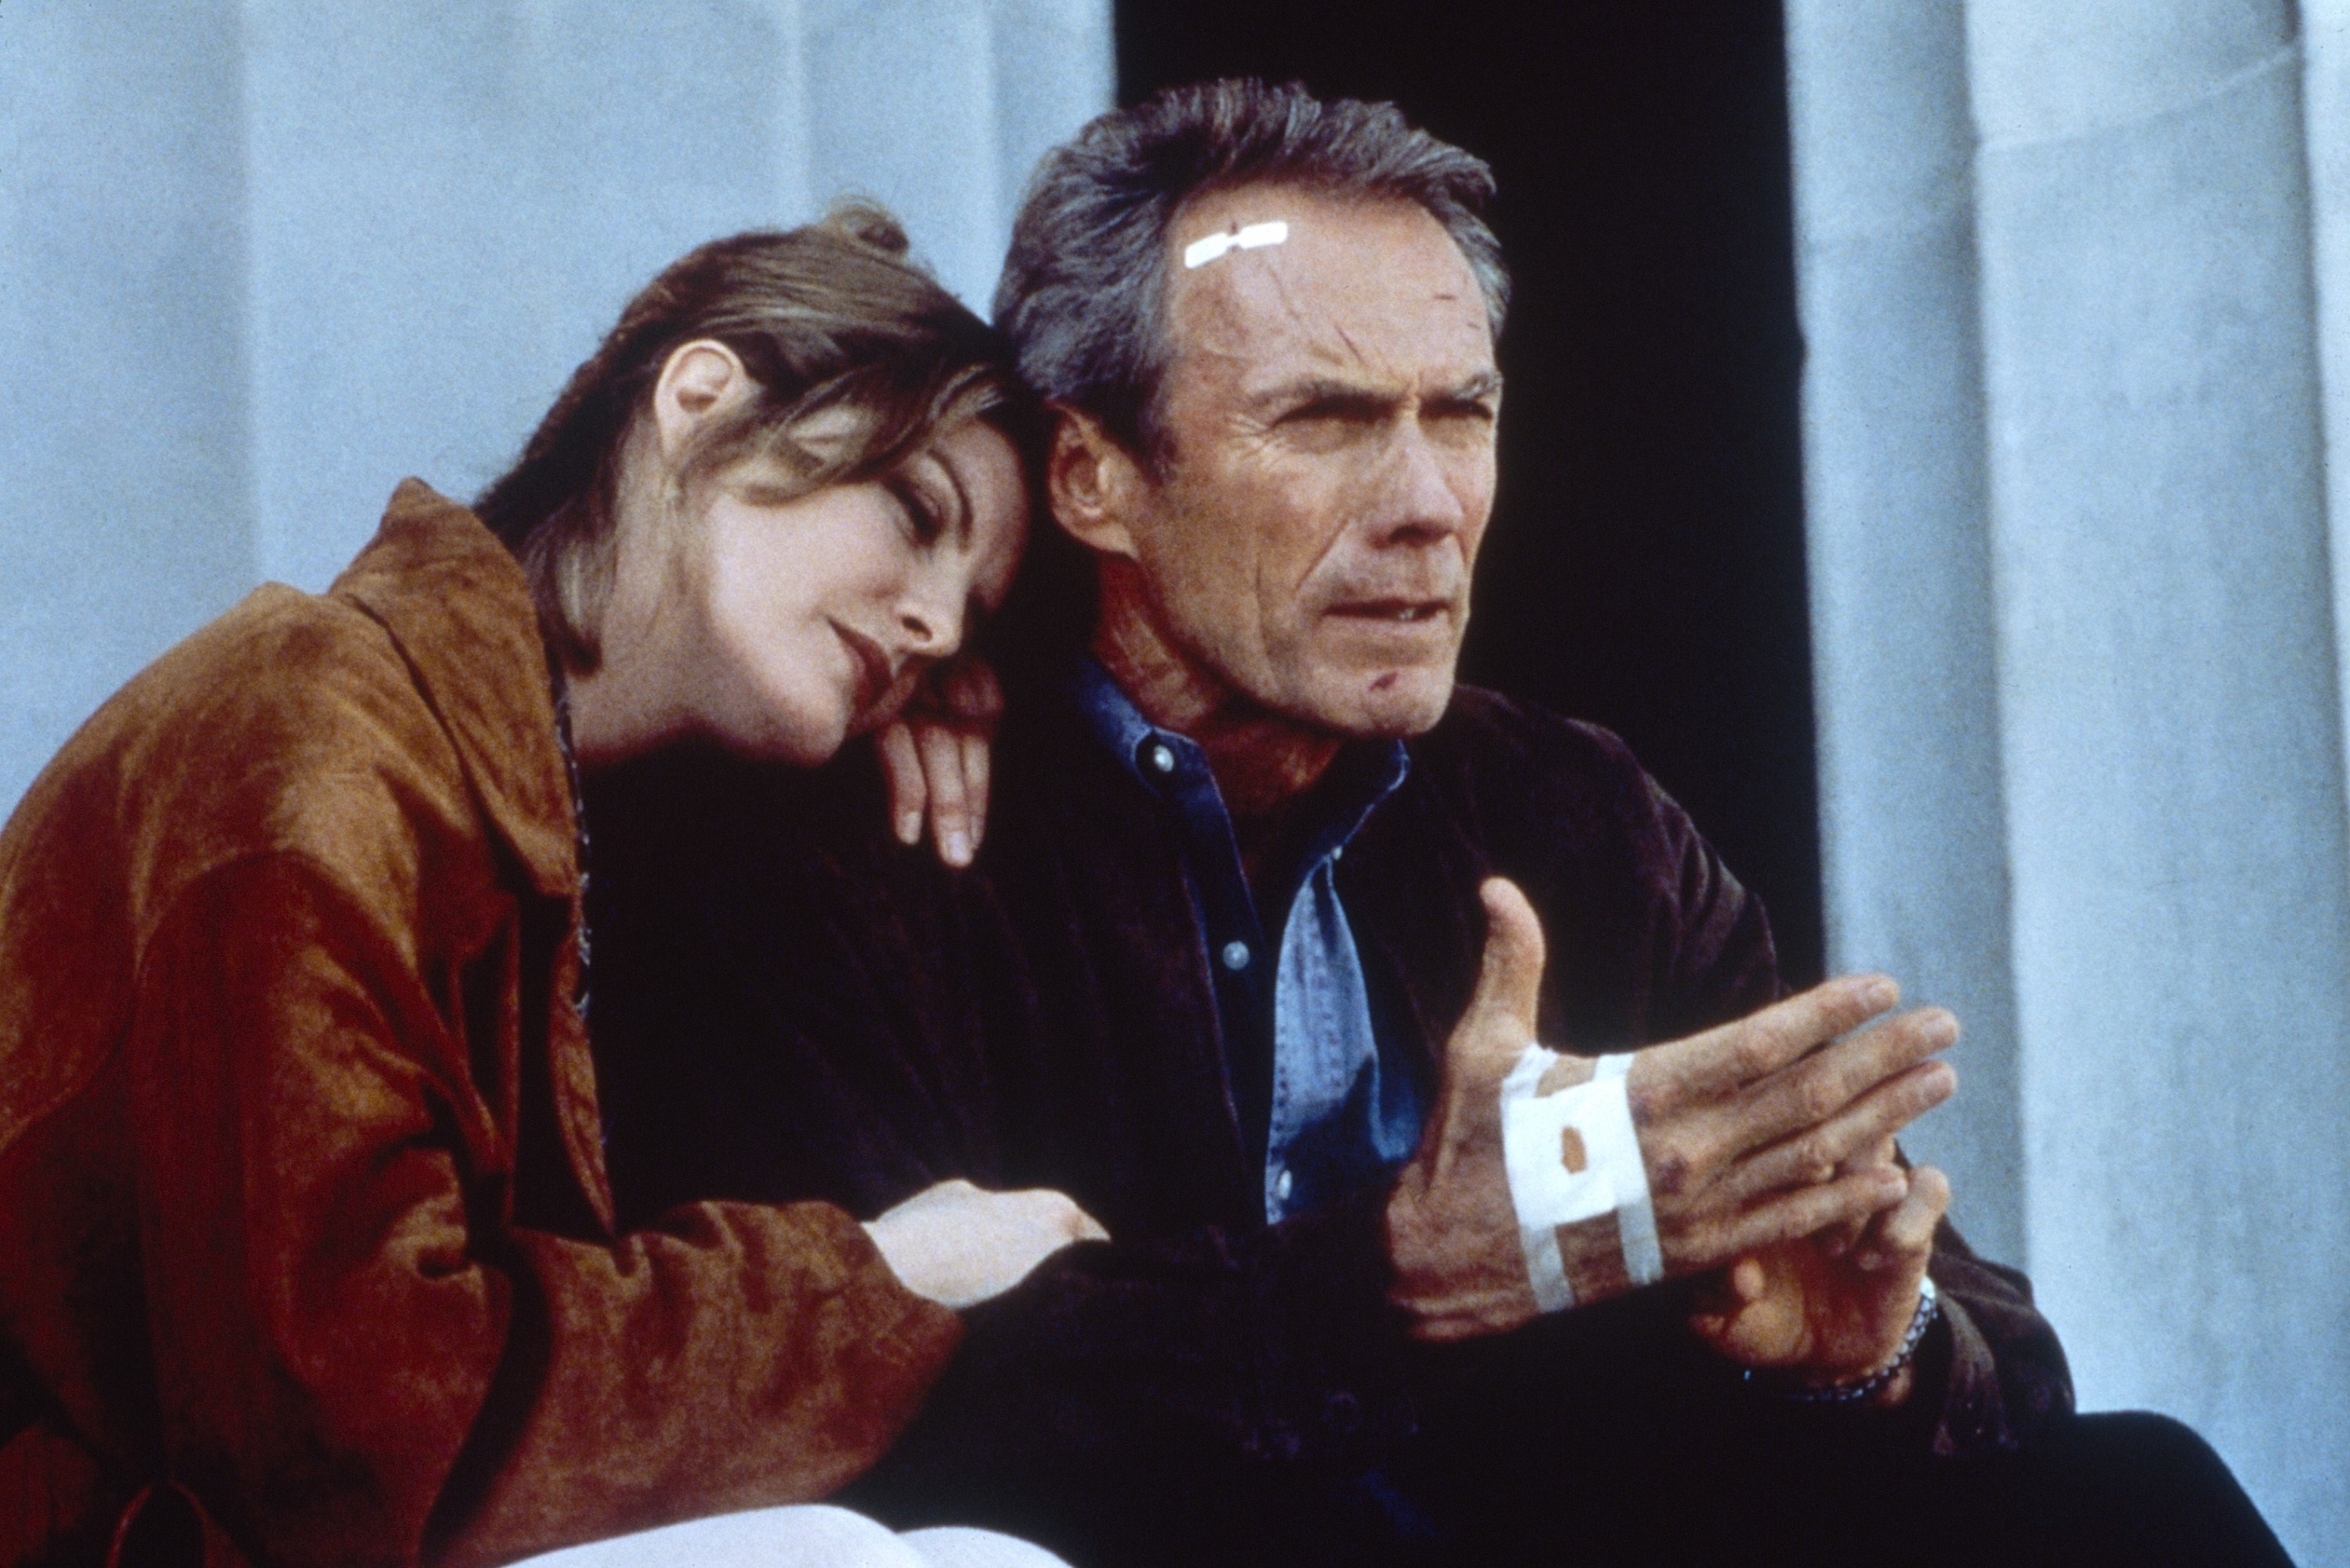 IN THE LINE OF FIRE, Rene Russo, Clint Eastwood, 1993